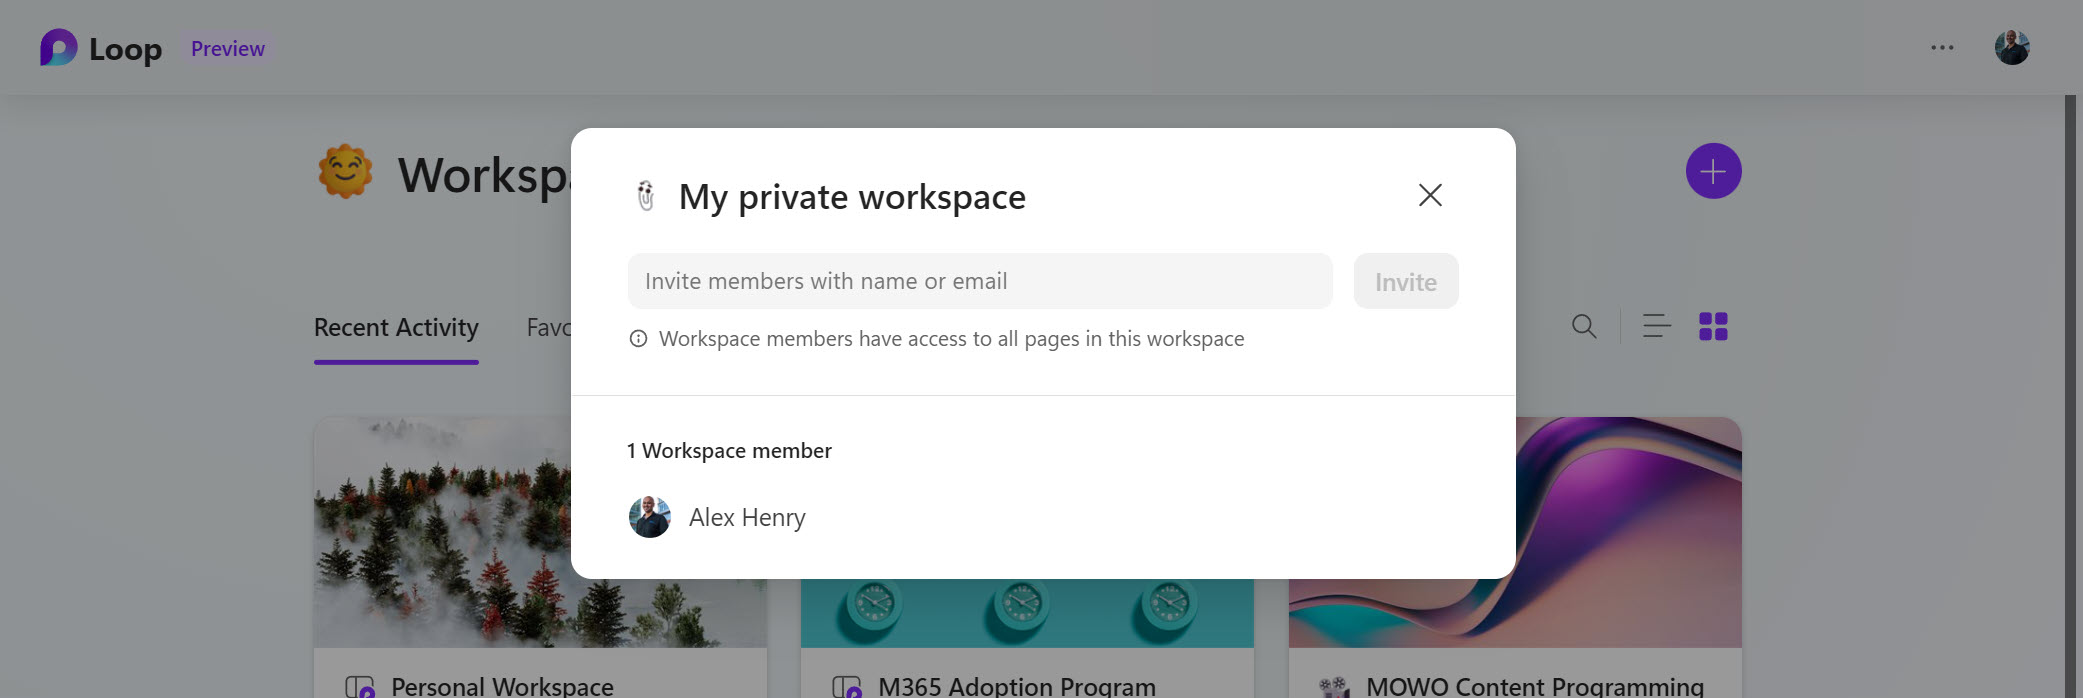 screenshot of a window in the Microsoft Loop app, showing a list of members and a field to invite members